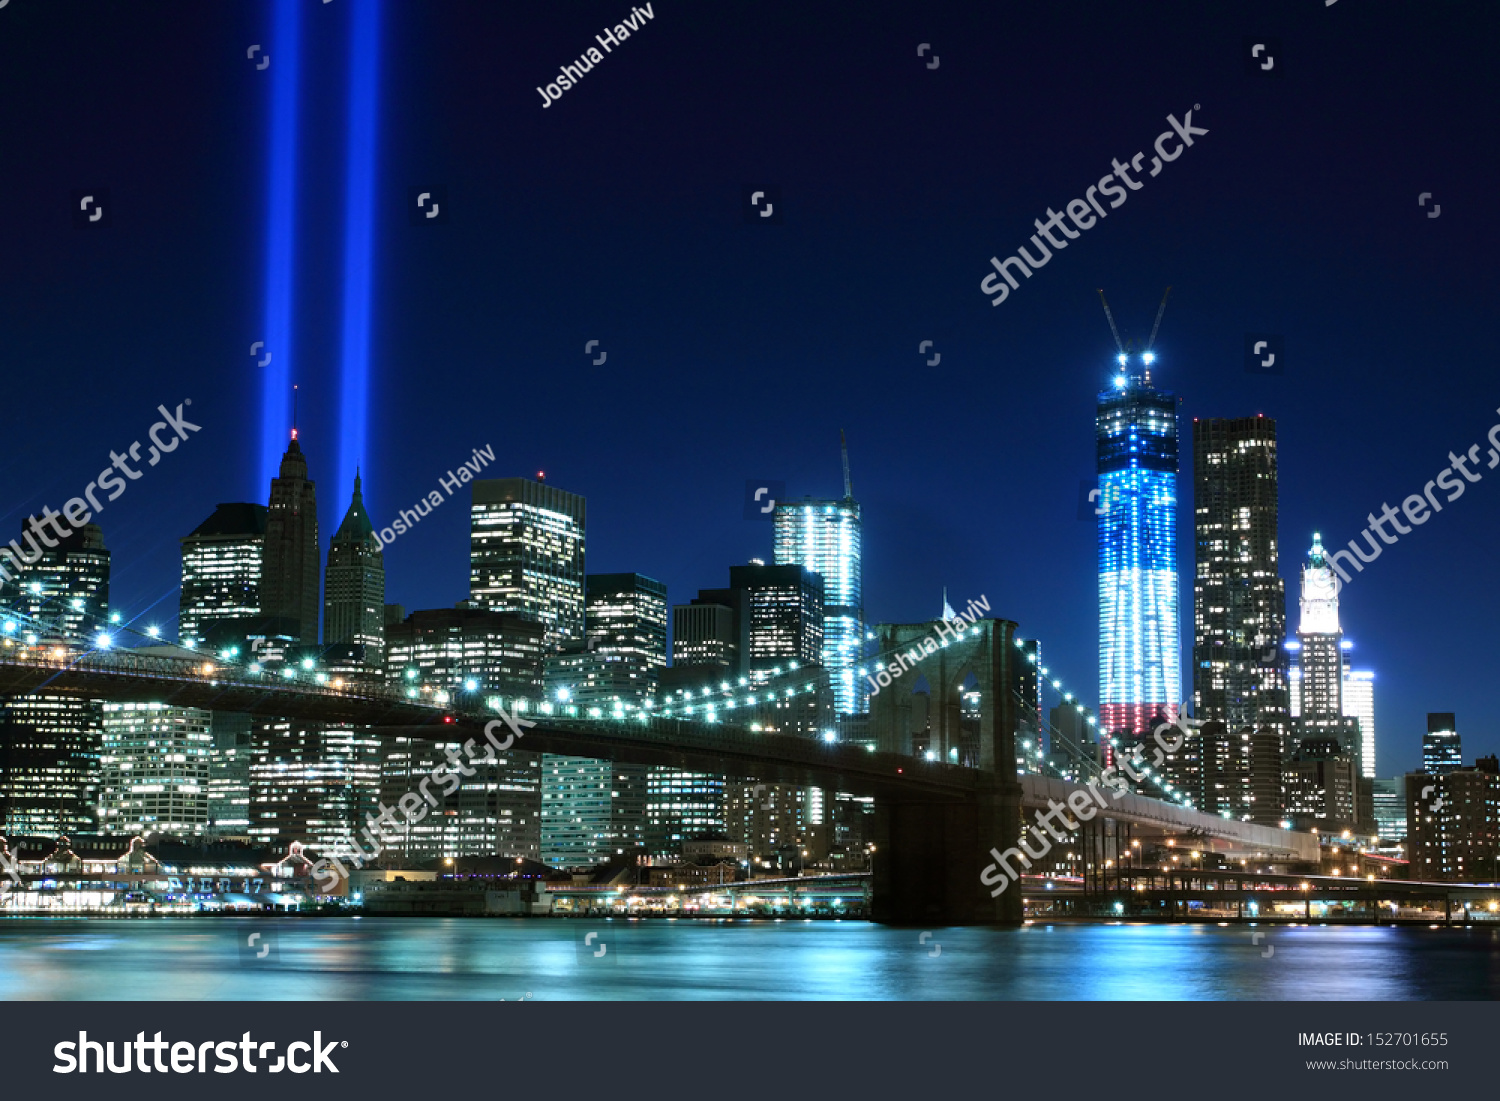 Brooklyn Bridge and the Towers of Lights (Tribute in Light) at Night, Manhattan, New York City